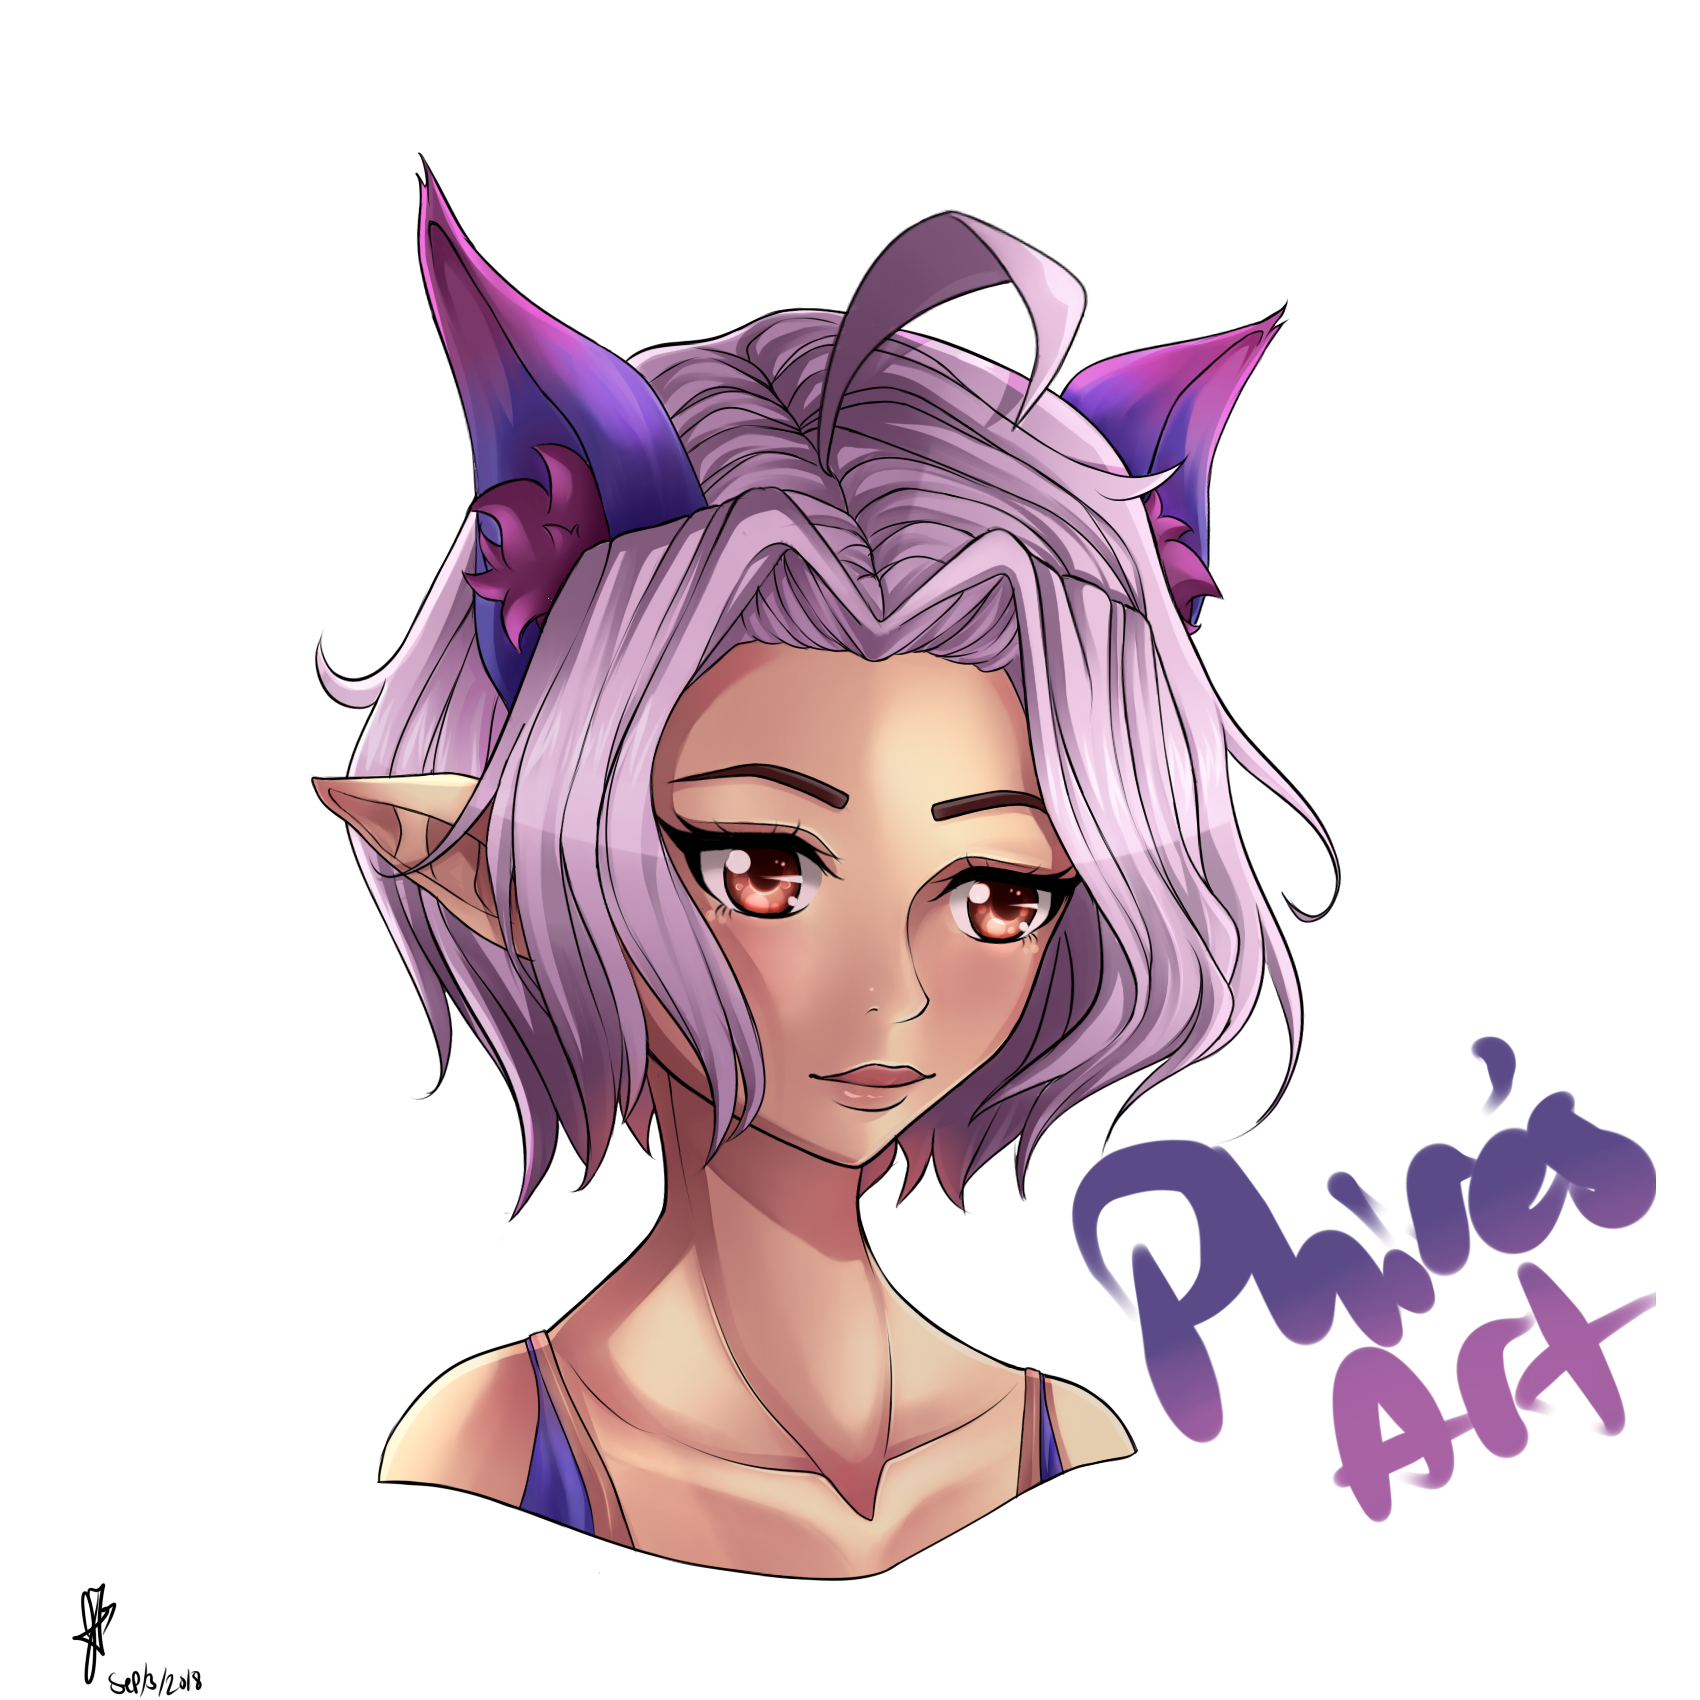 ambers_commission_of_her_mabinogi_character_by_janepitt-dclxirv.png